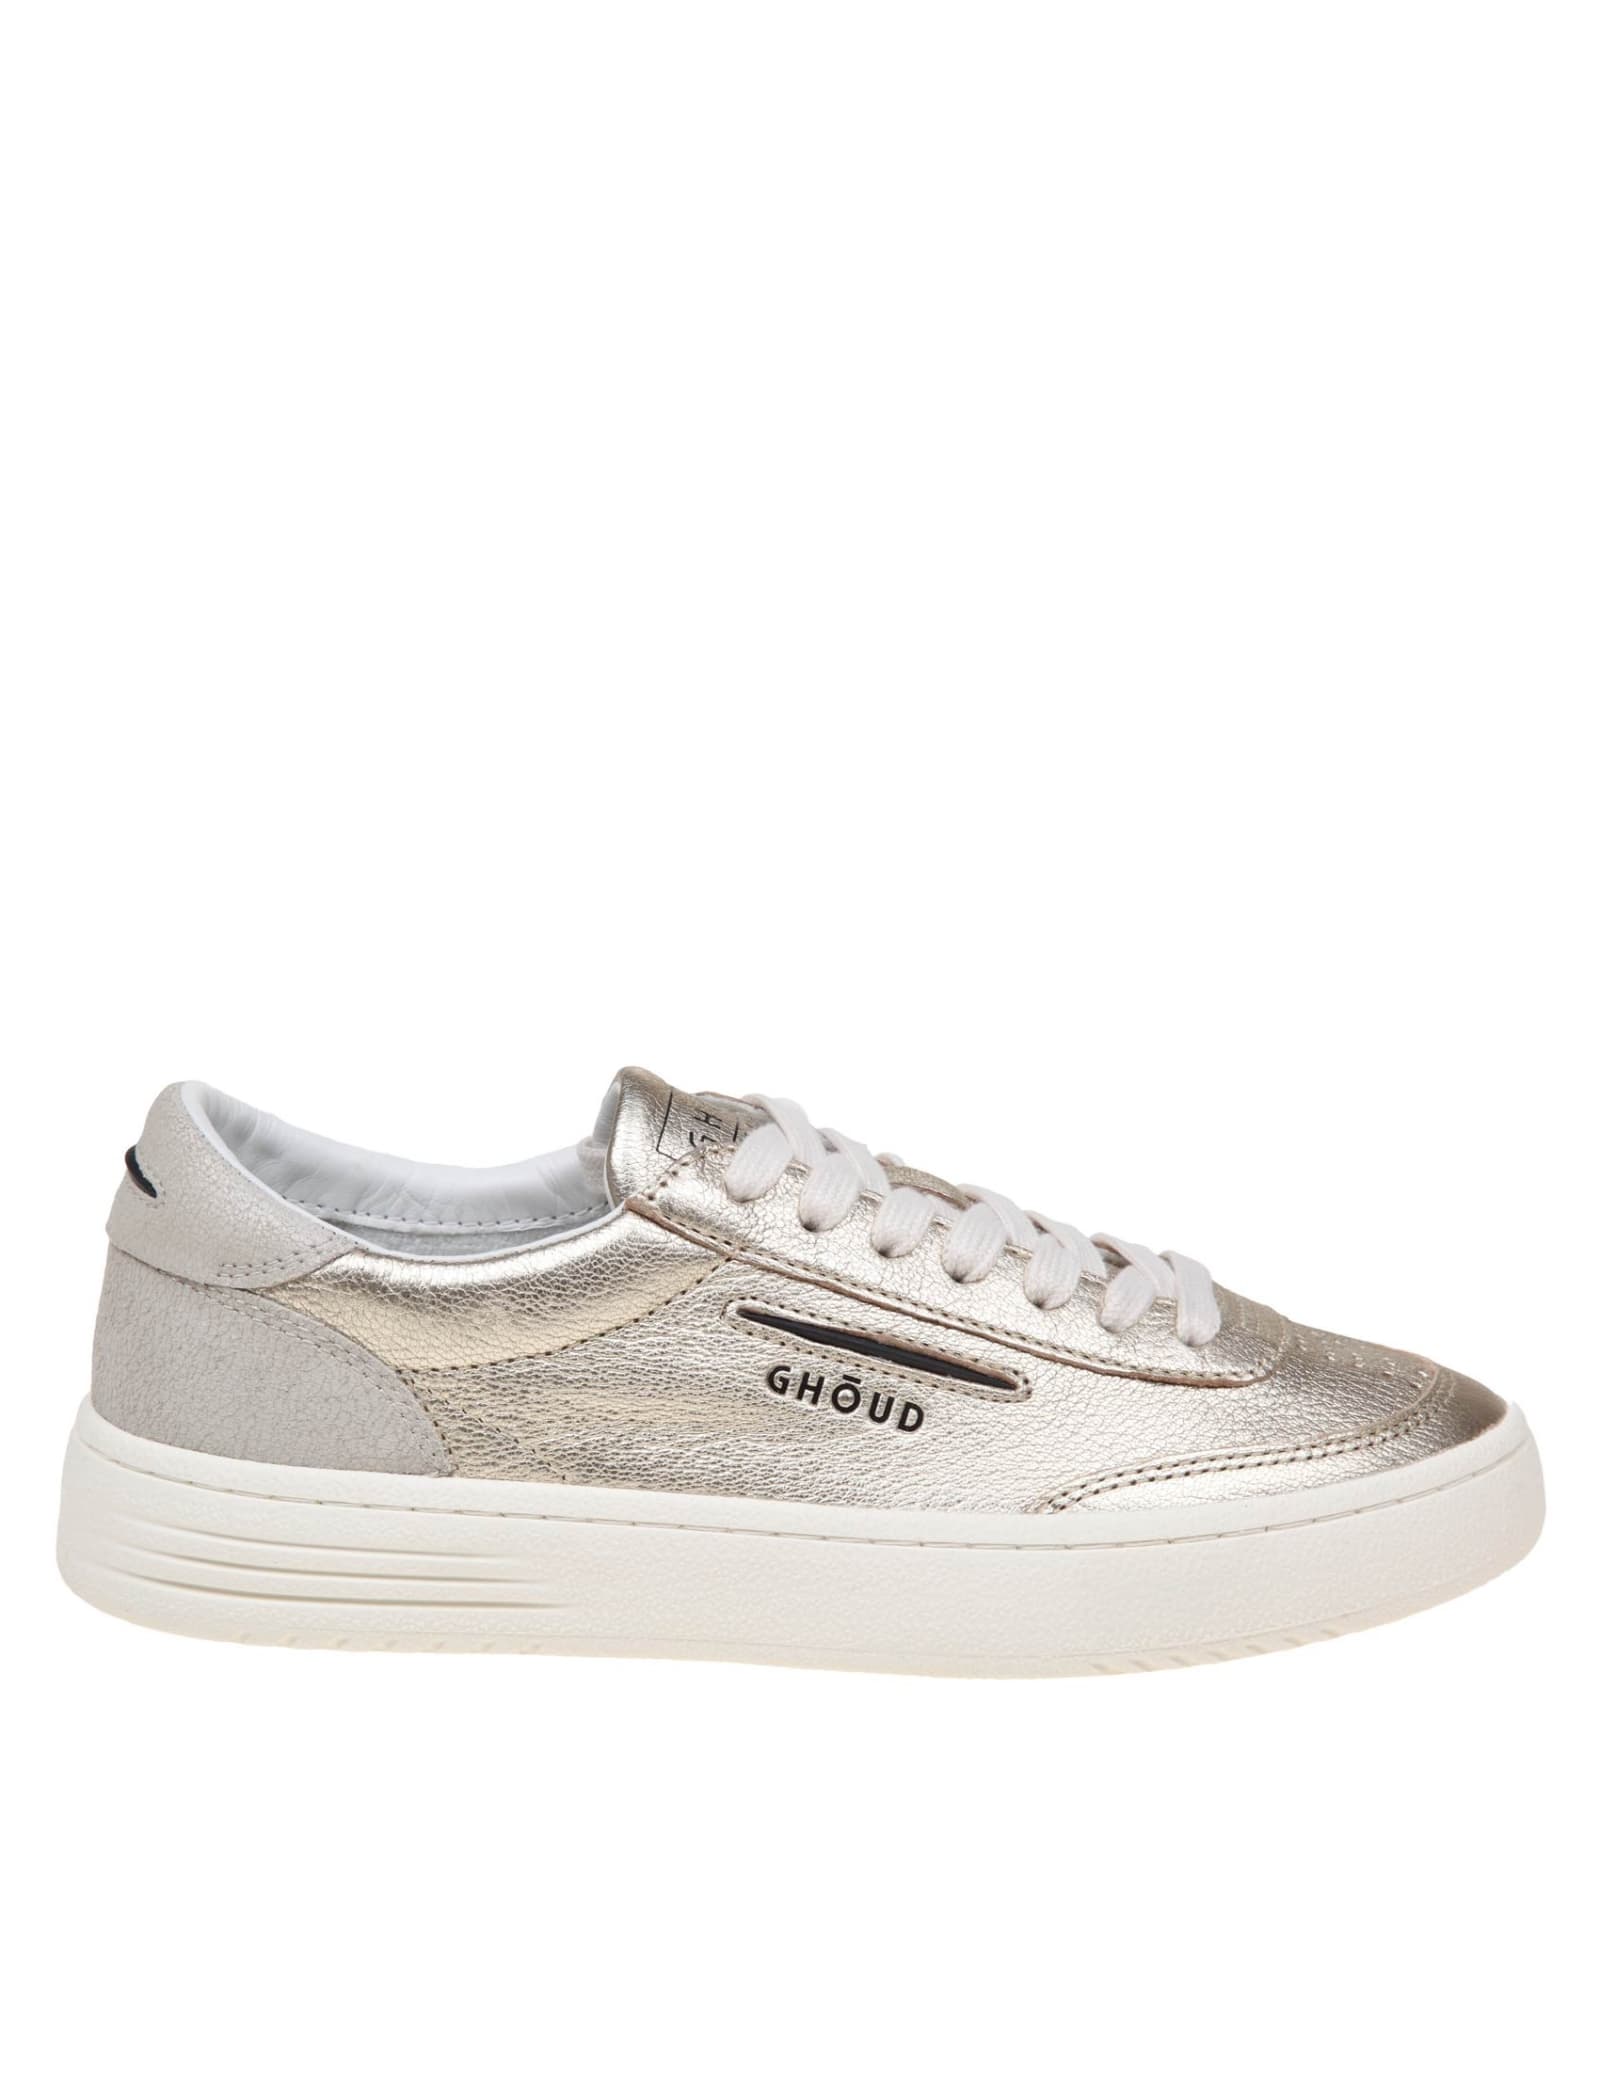 Lido Low Sneakers In Platinum Color Leather